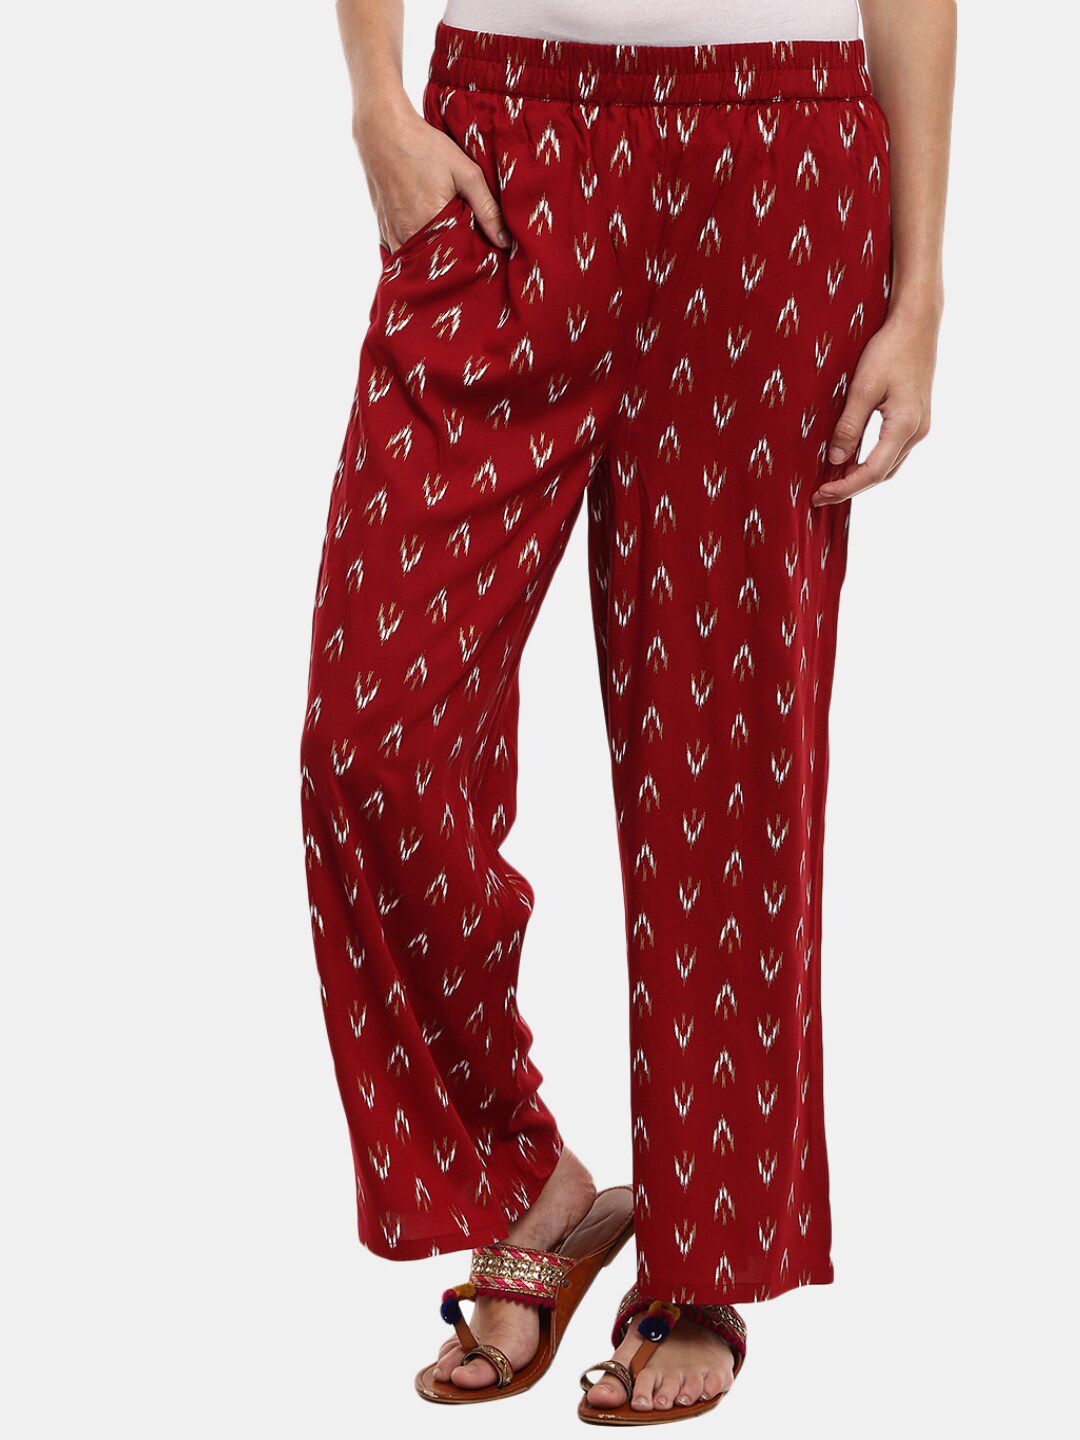 V-Mart Women Maroon & White Ethnic Motifs Printed Knitted Ethnic Palazzos Price in India